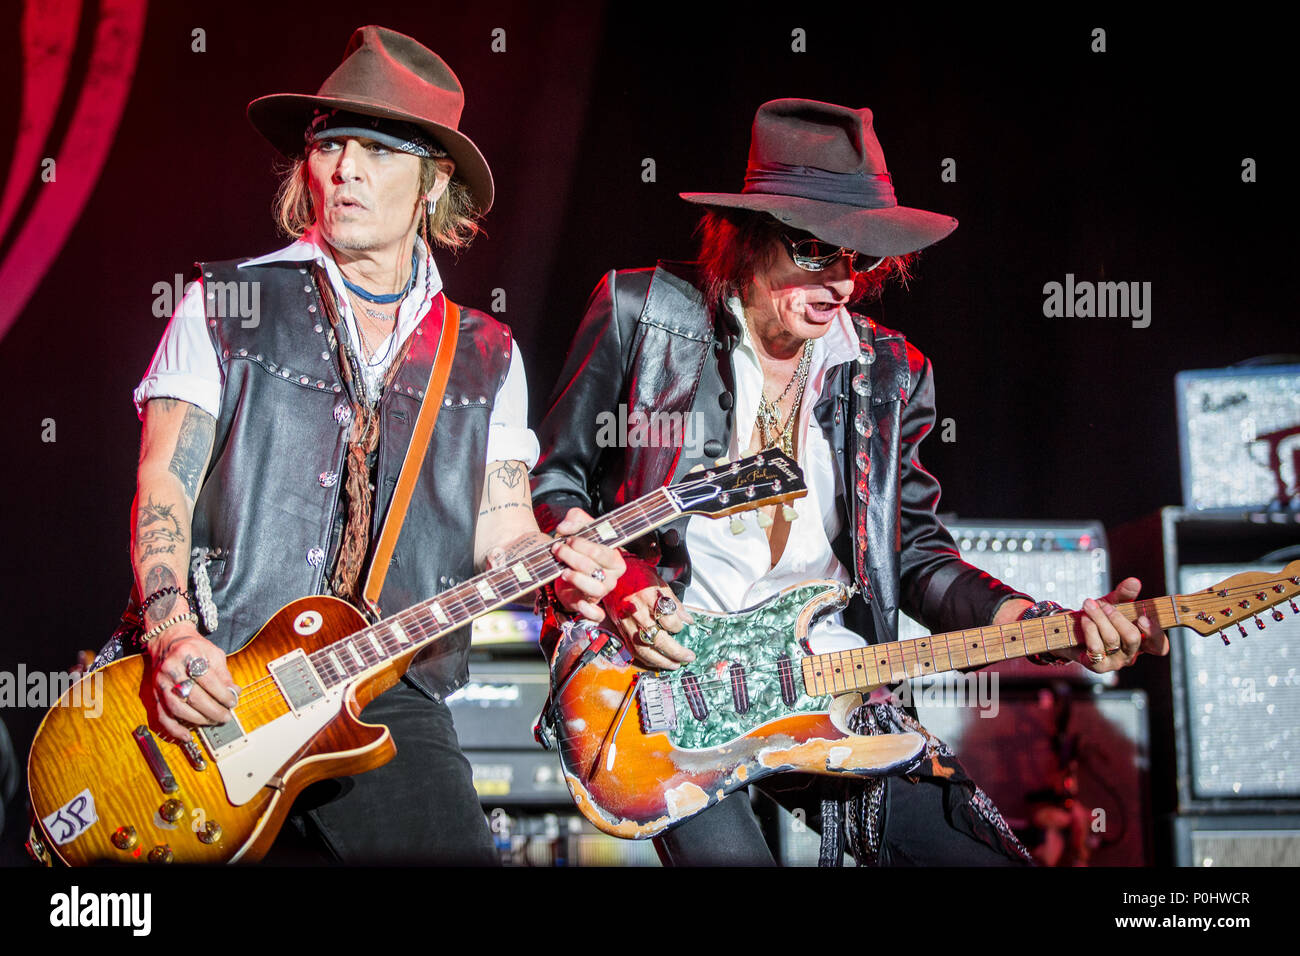 Denmark, Copenhagen - June 8, 2018. The American rock band Hollywood  Vampires performs a live concert during Fredagsrock in Tivoli Copenhagen.  Here guitarists Johnny Depp (L) and Joe Perry (R) are seen